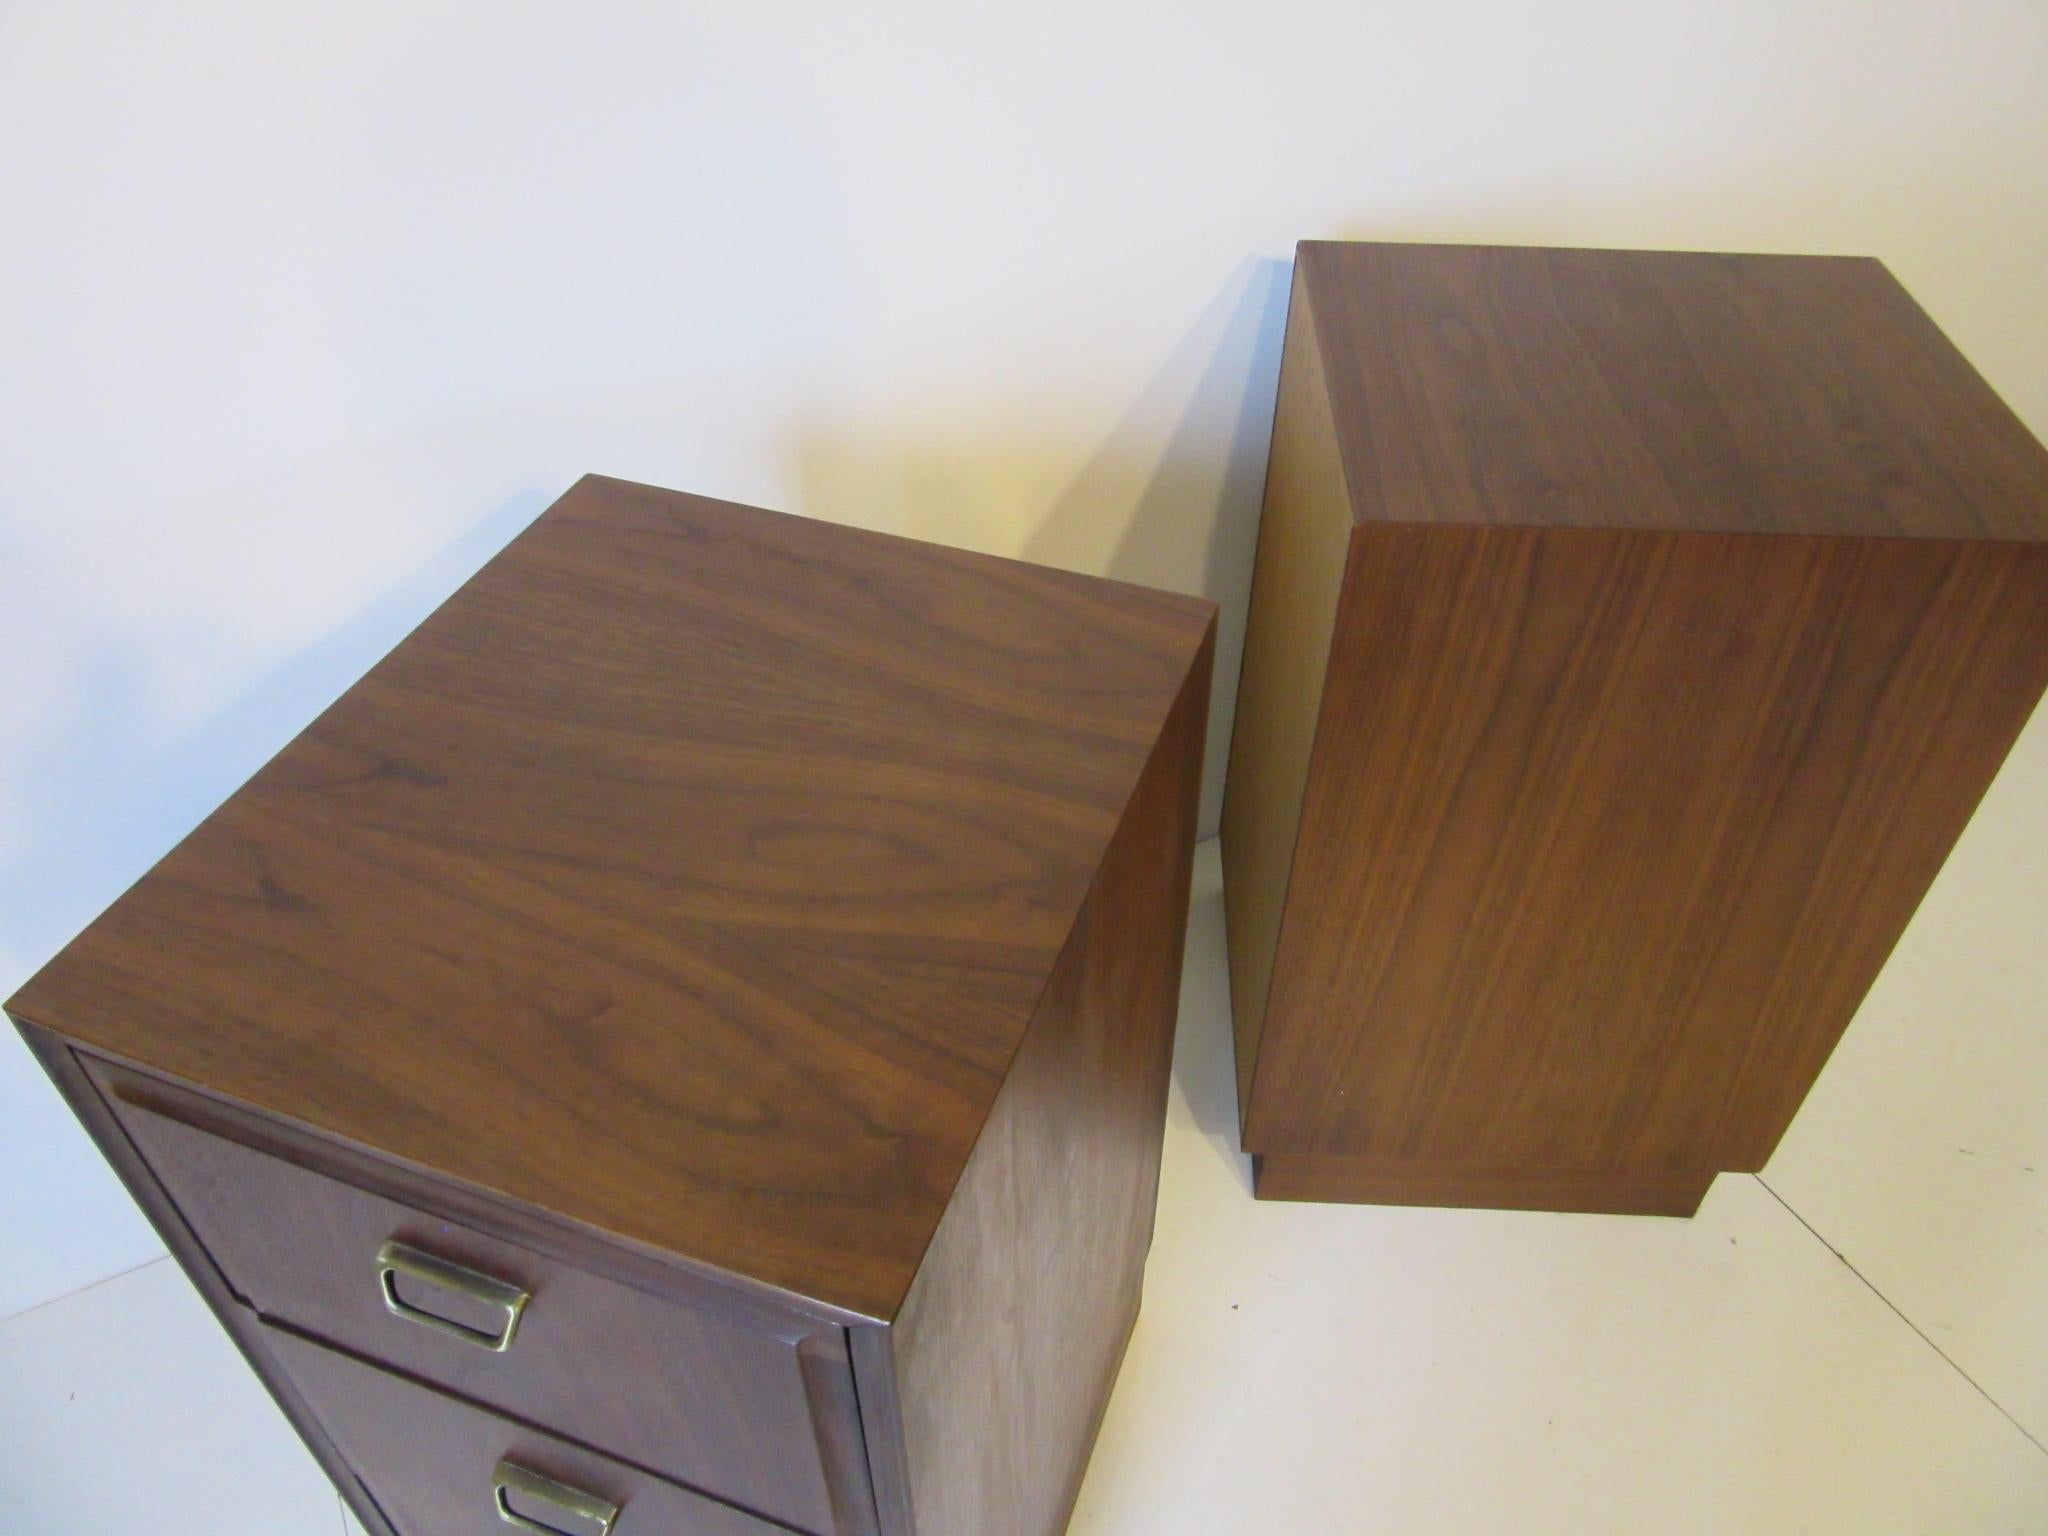 American Midcentury Tall Profile Walnut Nightstands by Founders